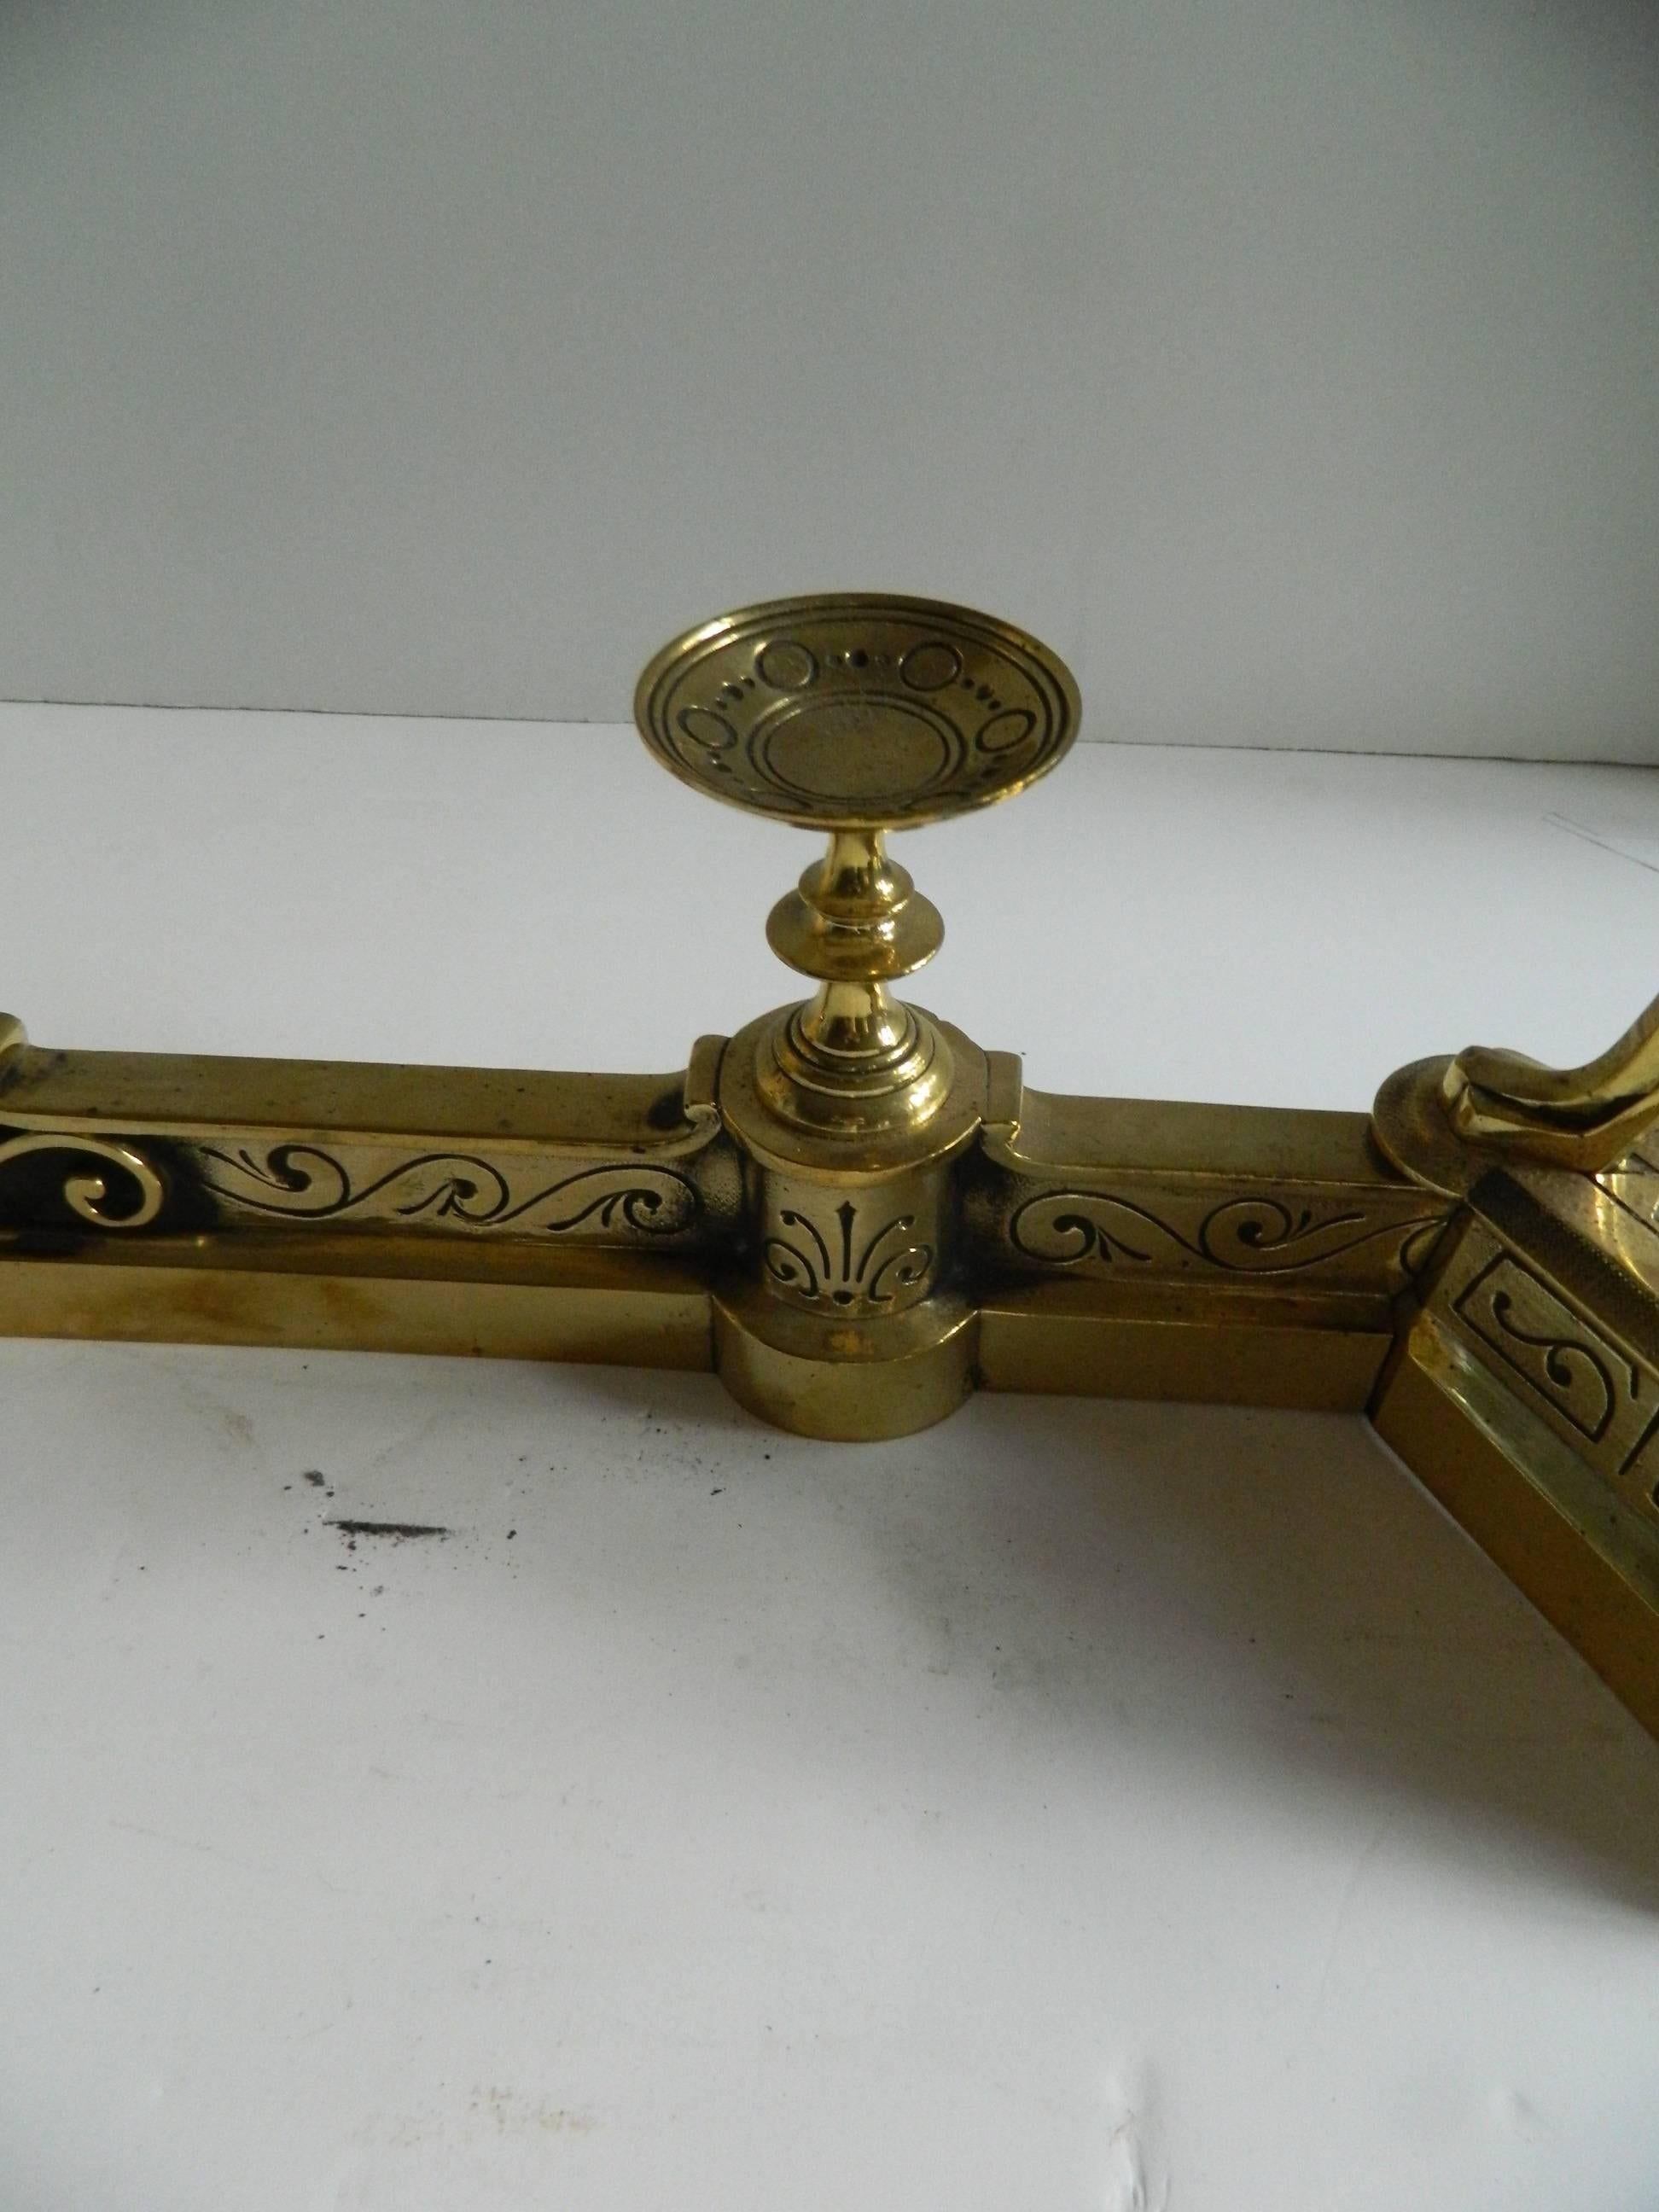 Pair of Polished Brass Chenet or Andirons with a Fender, Urn Motif, 19th Century In Good Condition For Sale In Savannah, GA